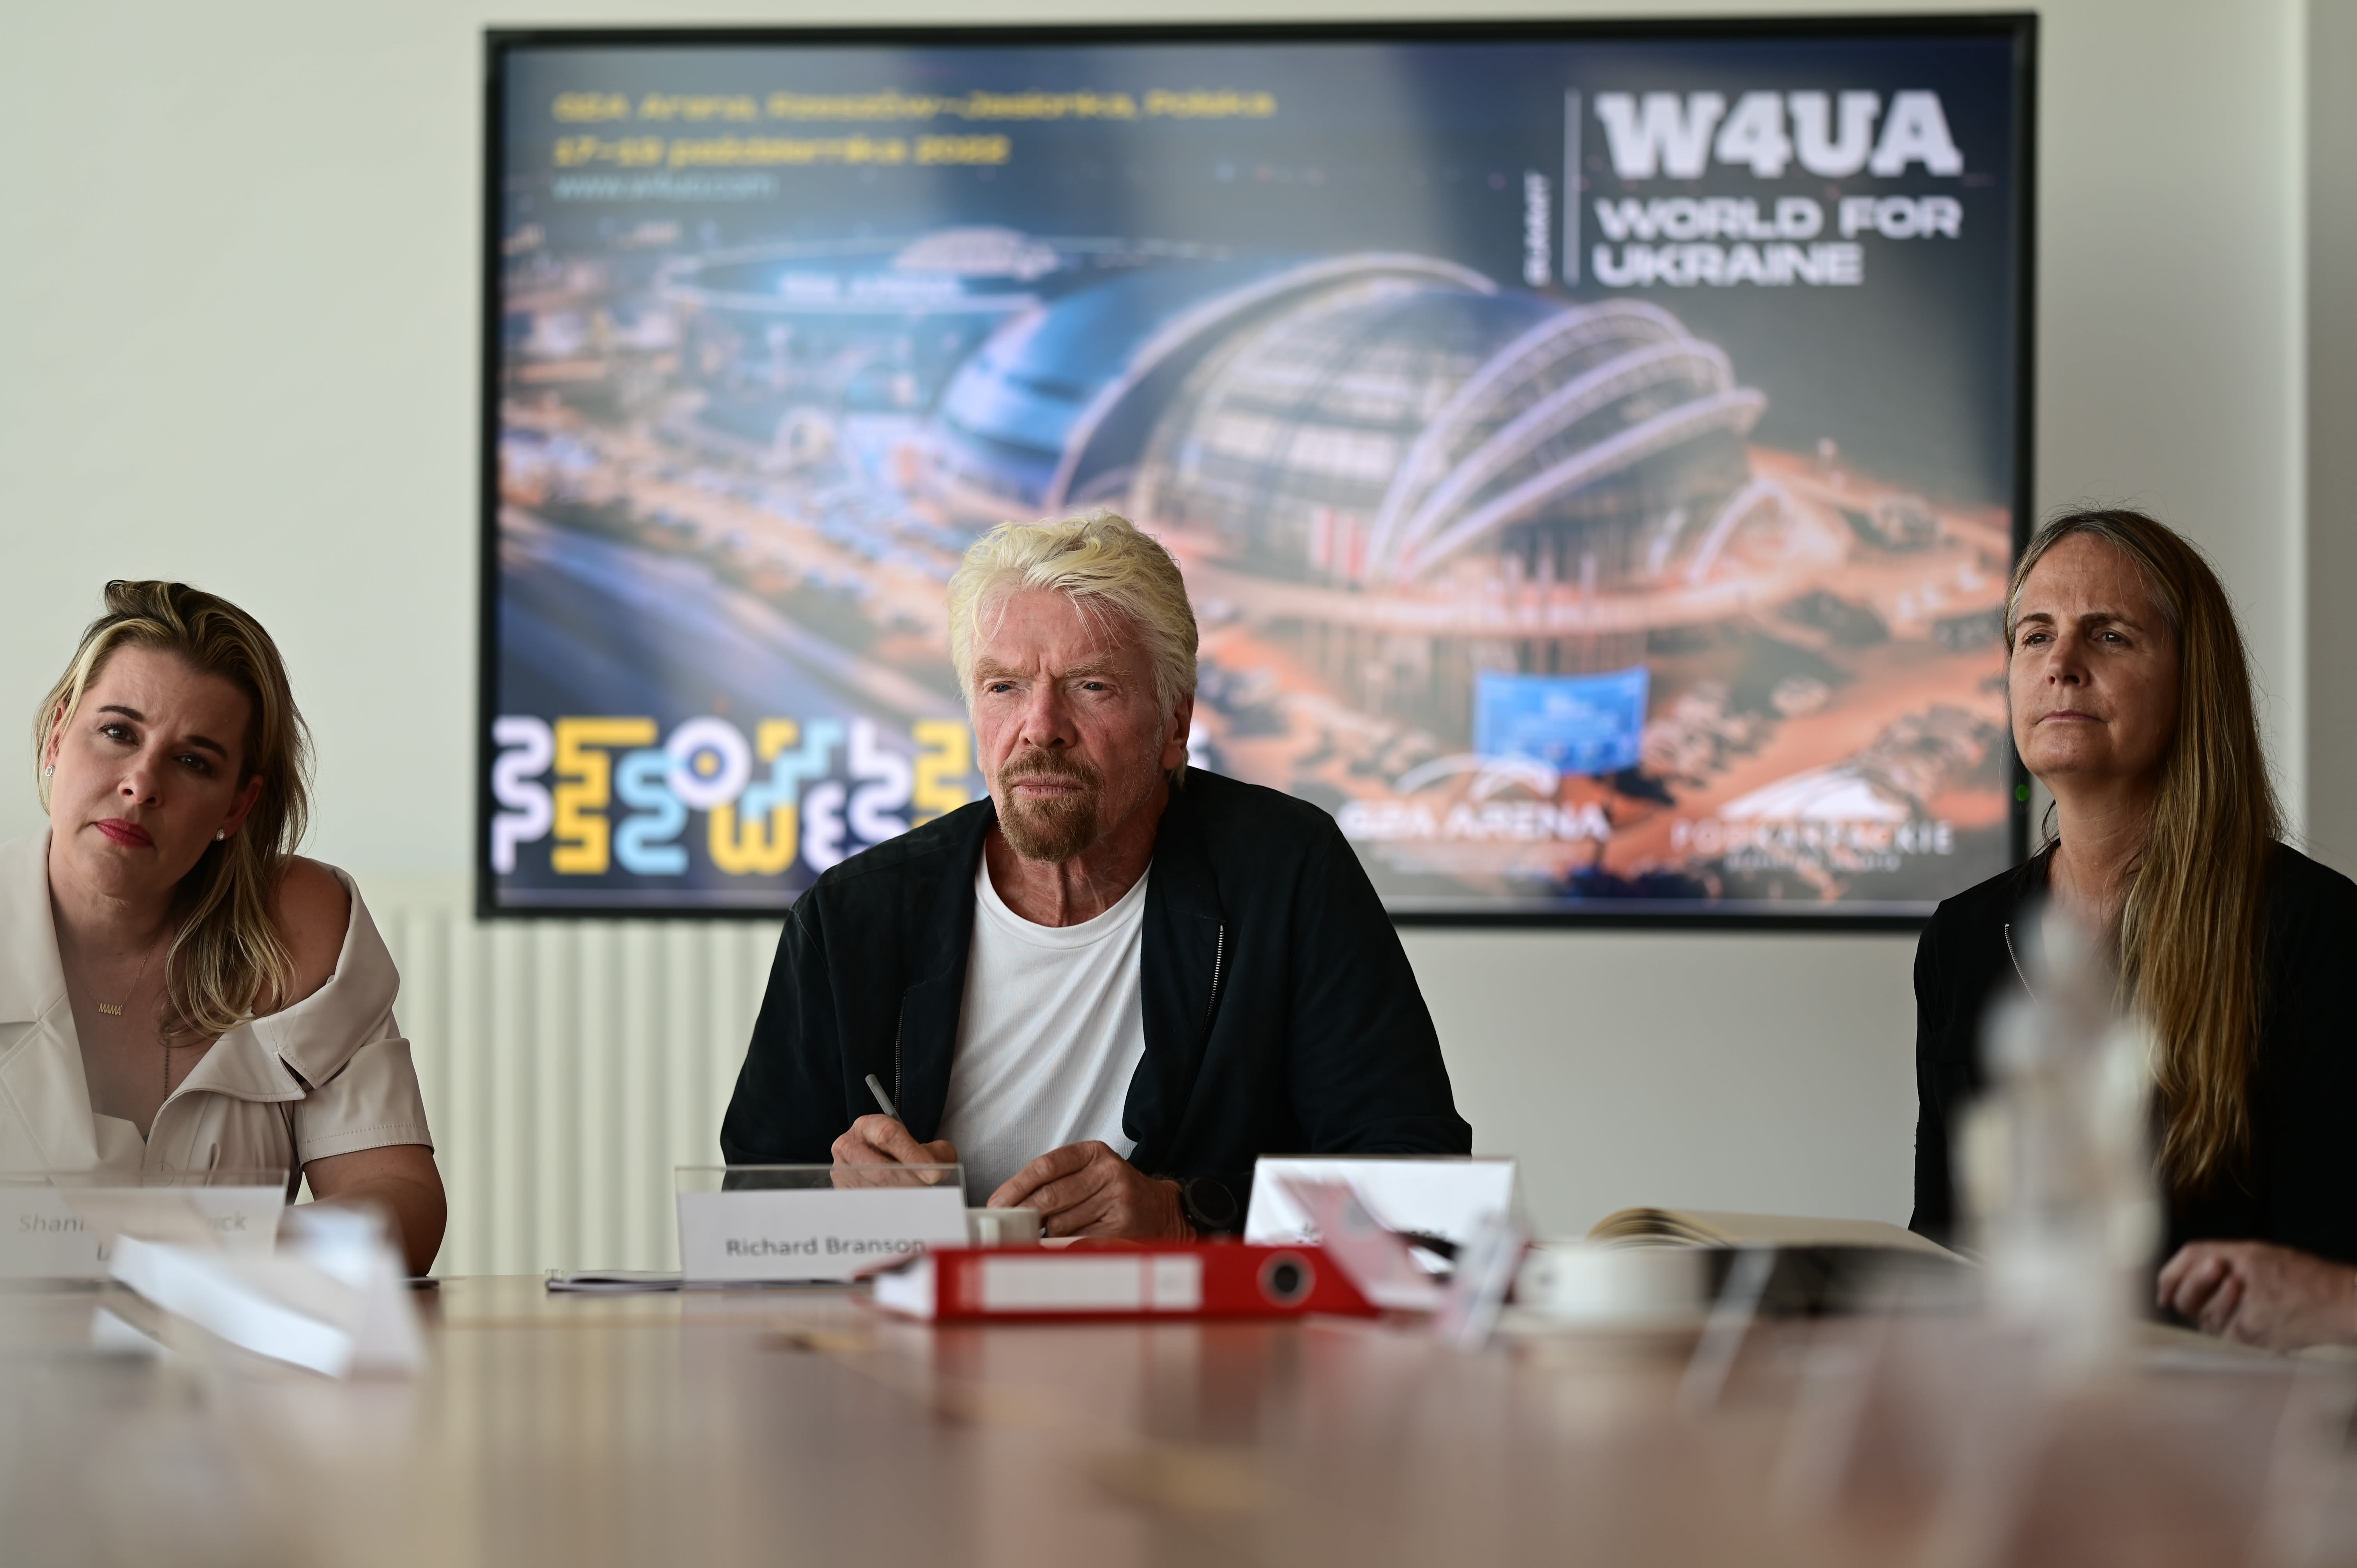 Richard Branson in Poland with Jean Oelwang and business leaders, discussing Ukraine